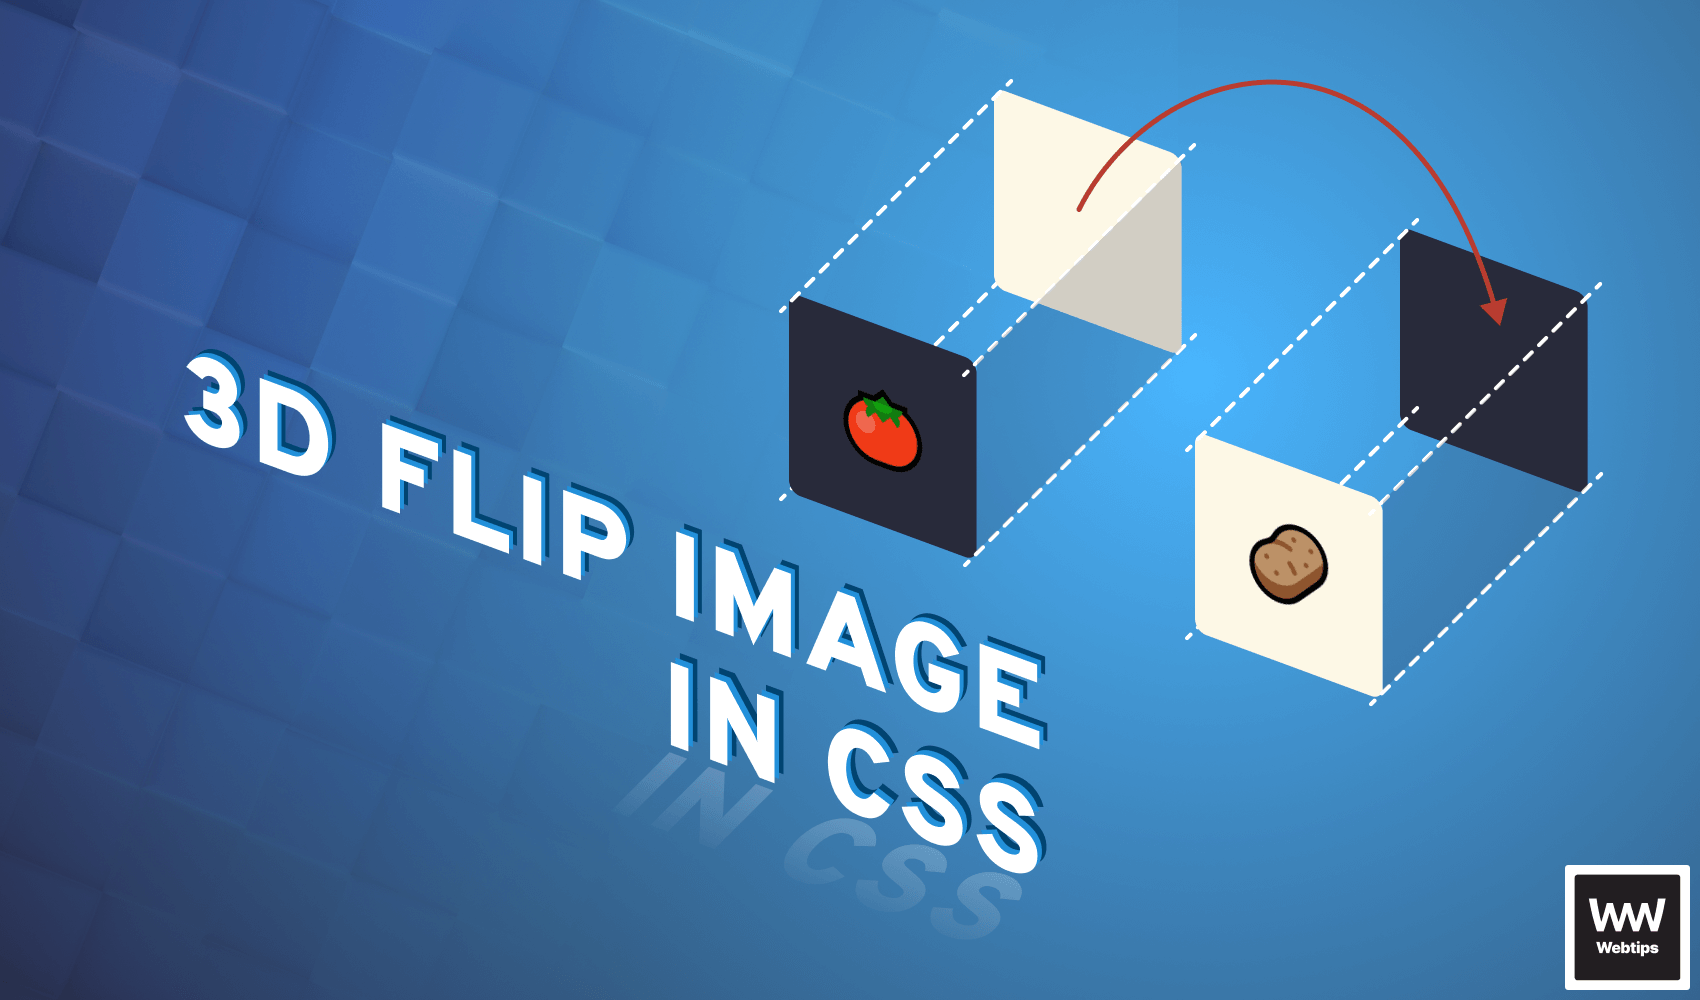 How to 3D Flip Images in CSS